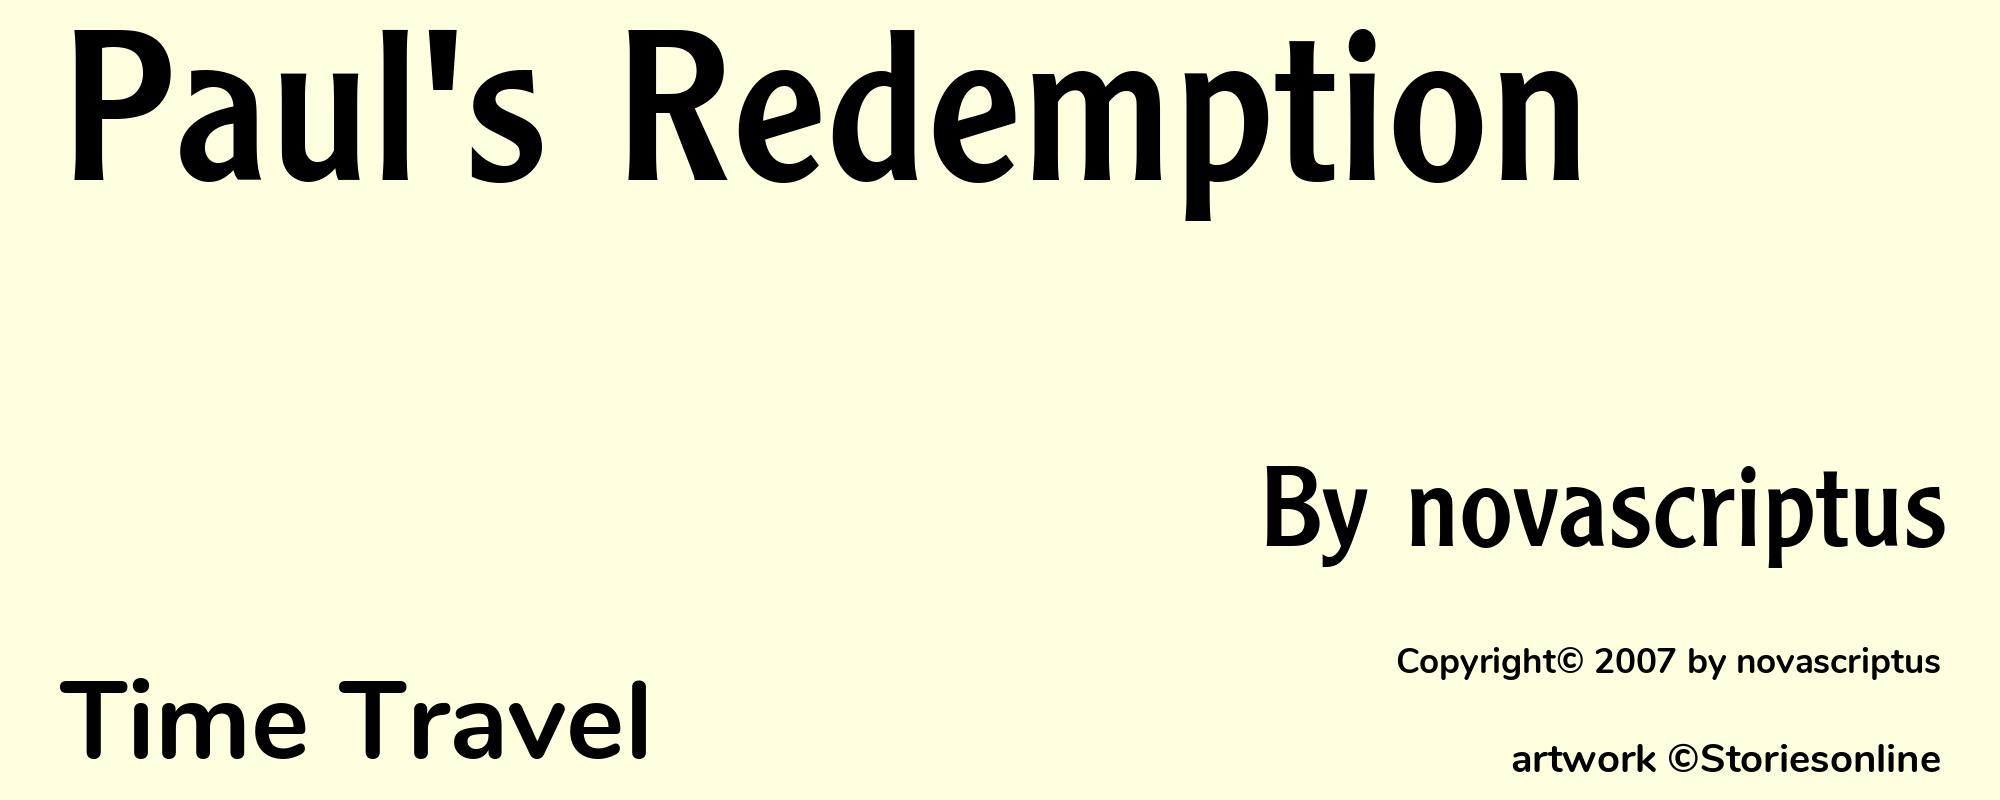 Paul's Redemption - Cover